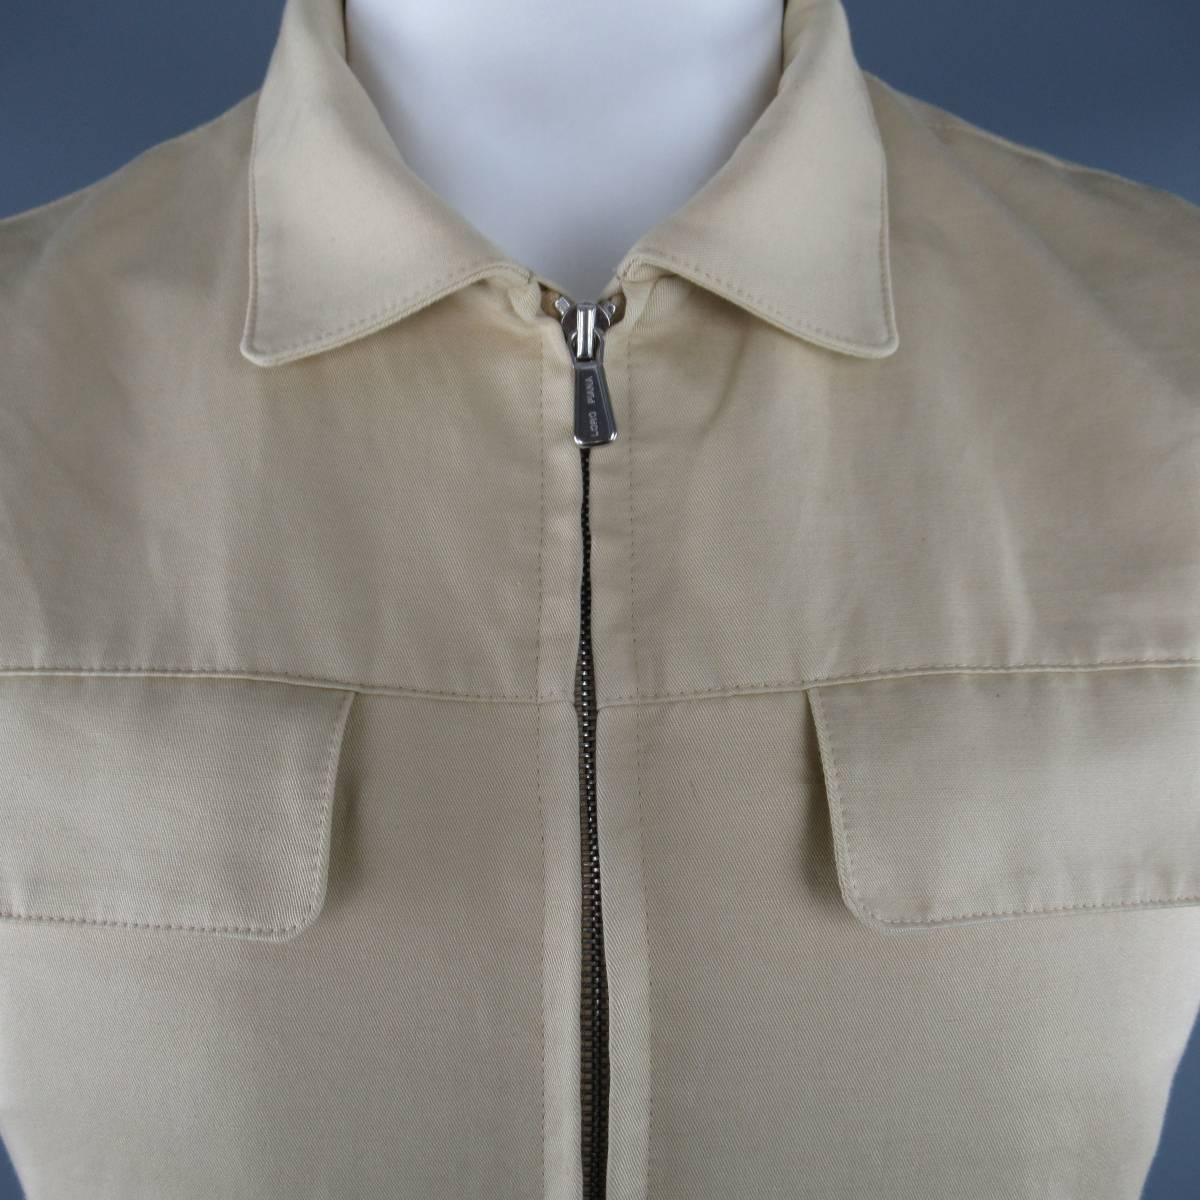 Classic LORO PIANA vest comes in rich khaki cotton linen blend fabric and features a double zip front, pointed collar, side slit pockets with tan suede accents, flap breast pockets,  and ribbed knit side panels. Made in Italy.
 
Good Pre-Owned